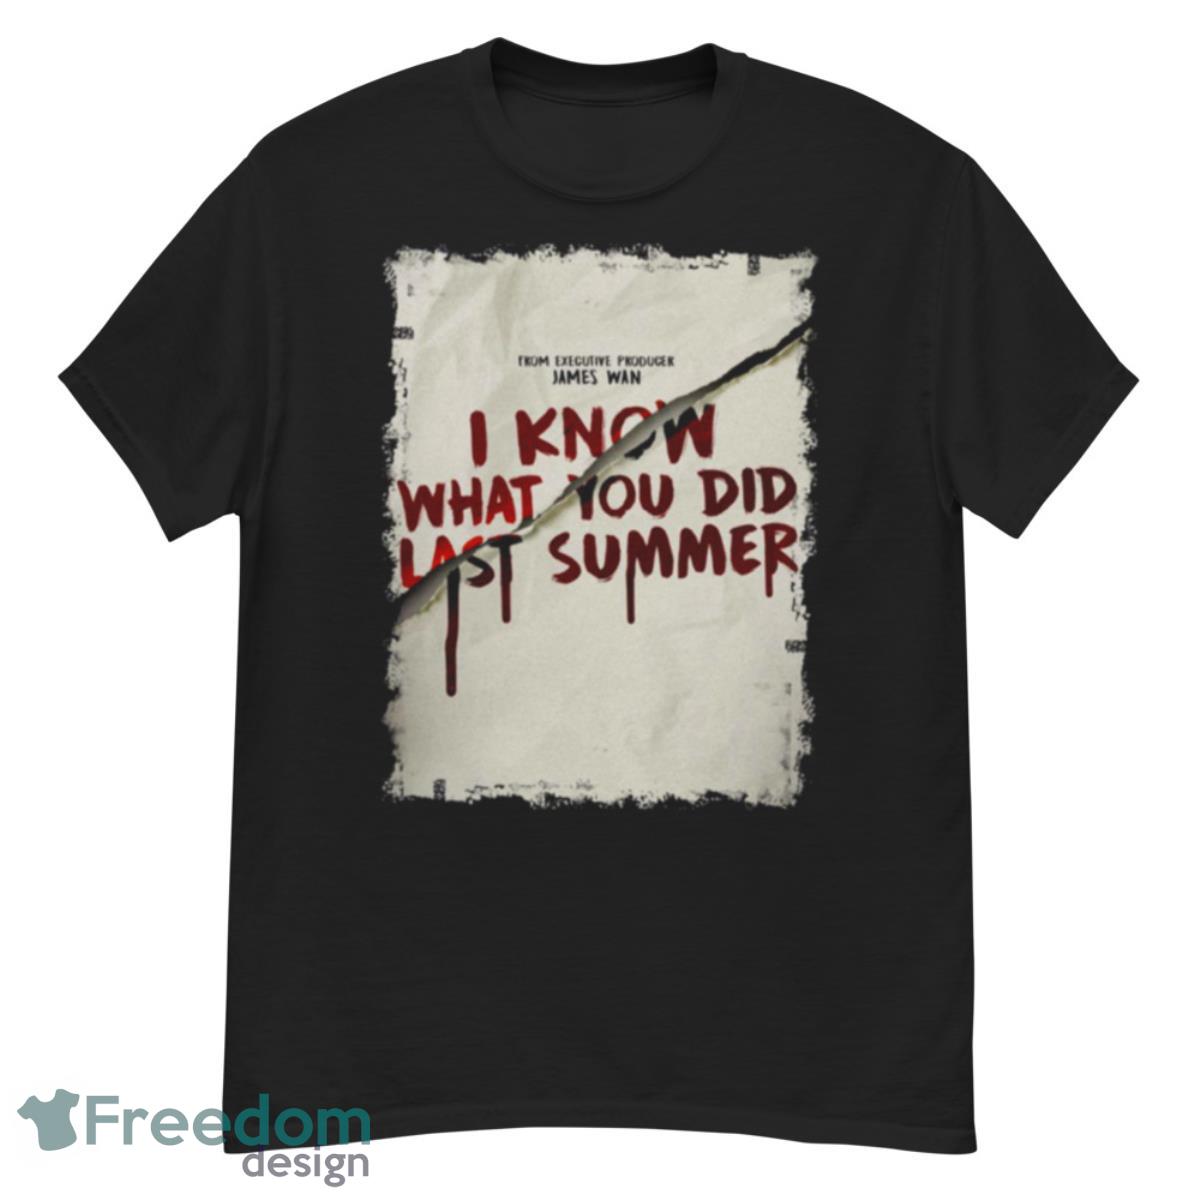 James Wan I Know What You Did Last Summer shirt - G500 Men’s Classic T-Shirt